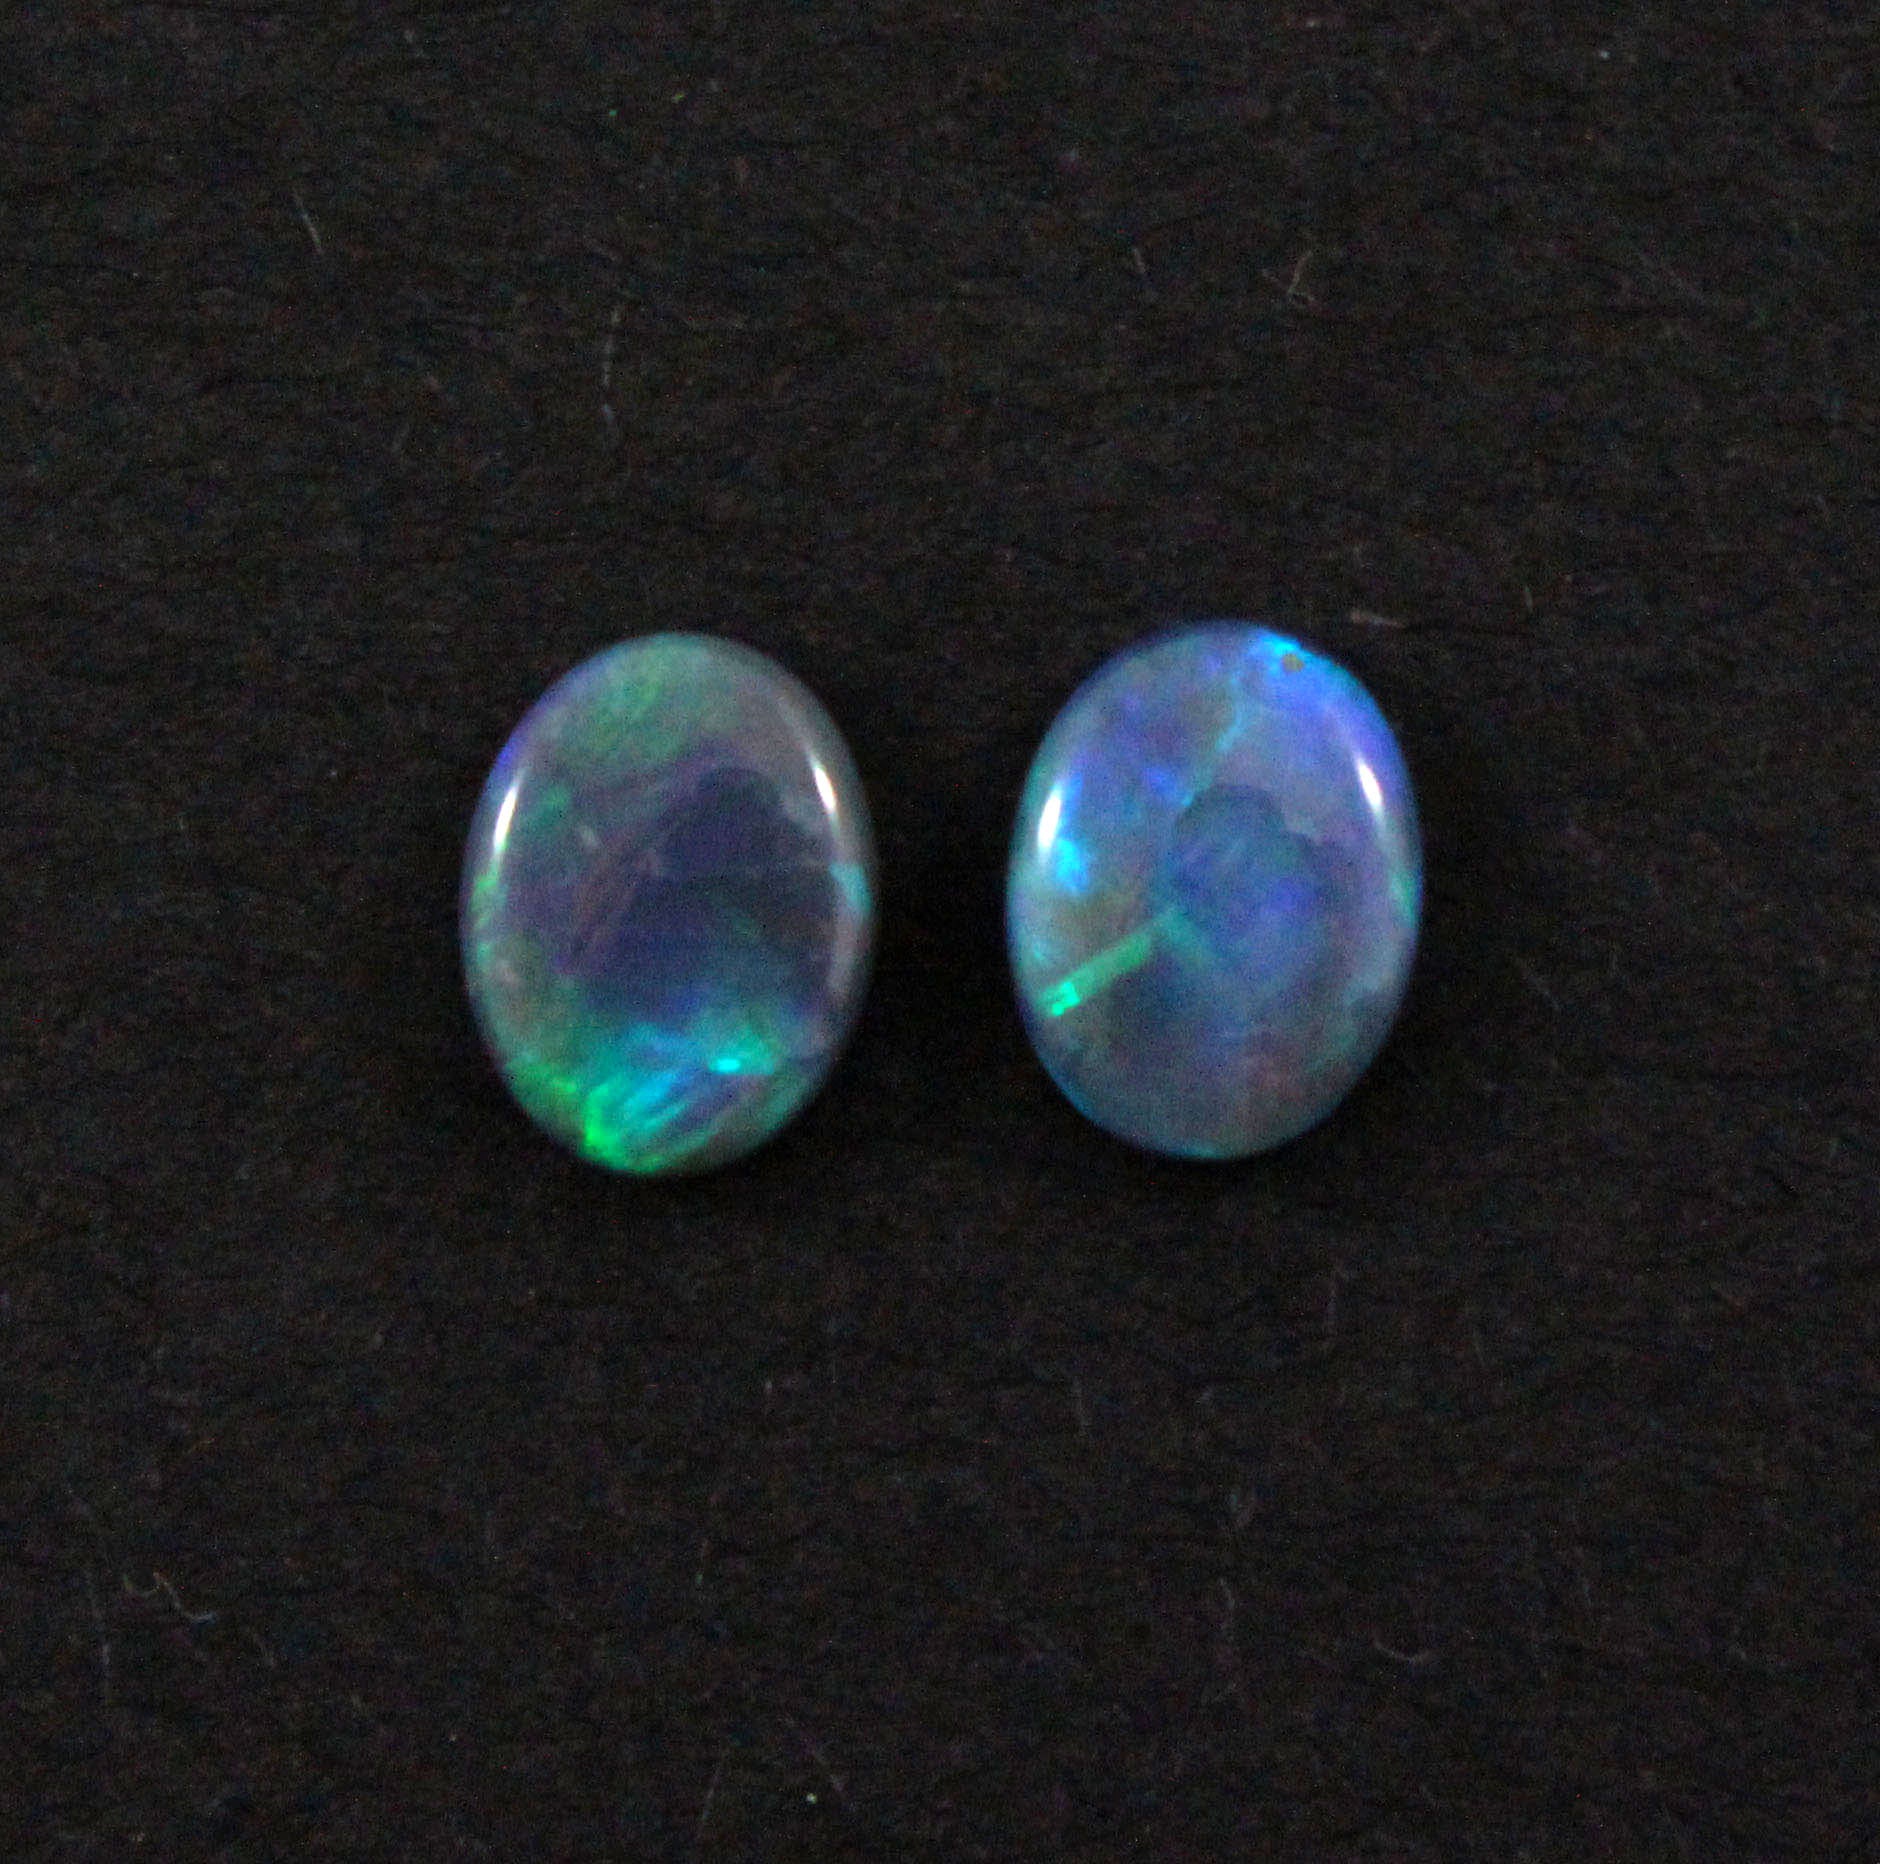 Australian black opal matched pair 1.68 carat total loose gemstone - Purchase only with custom order - Sarah Hughes - 5